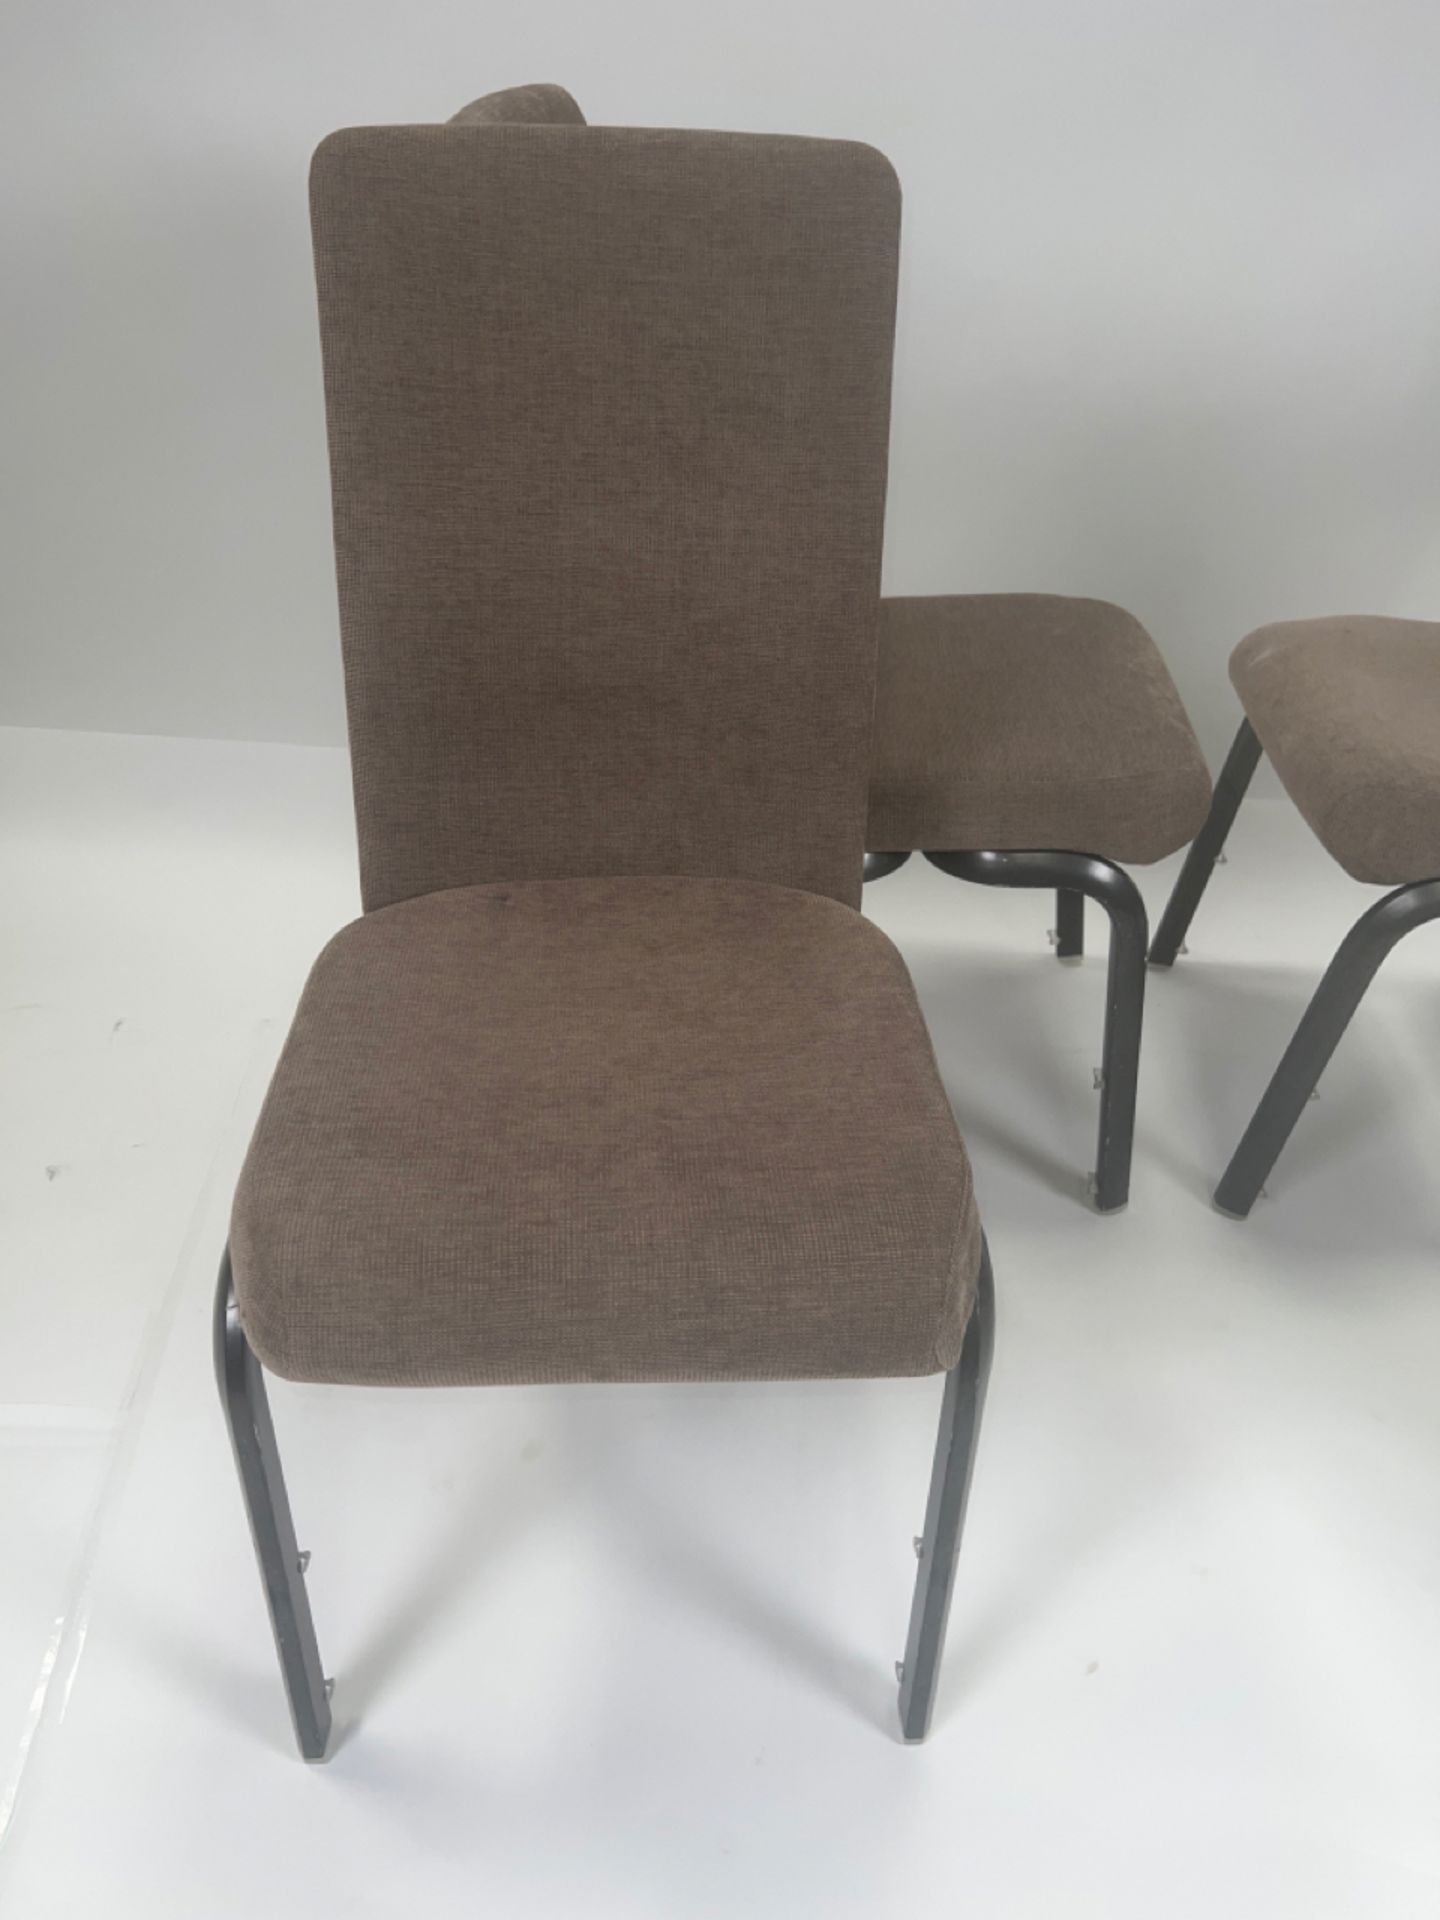 Set Of 6 Conference Chairs - Image 2 of 2